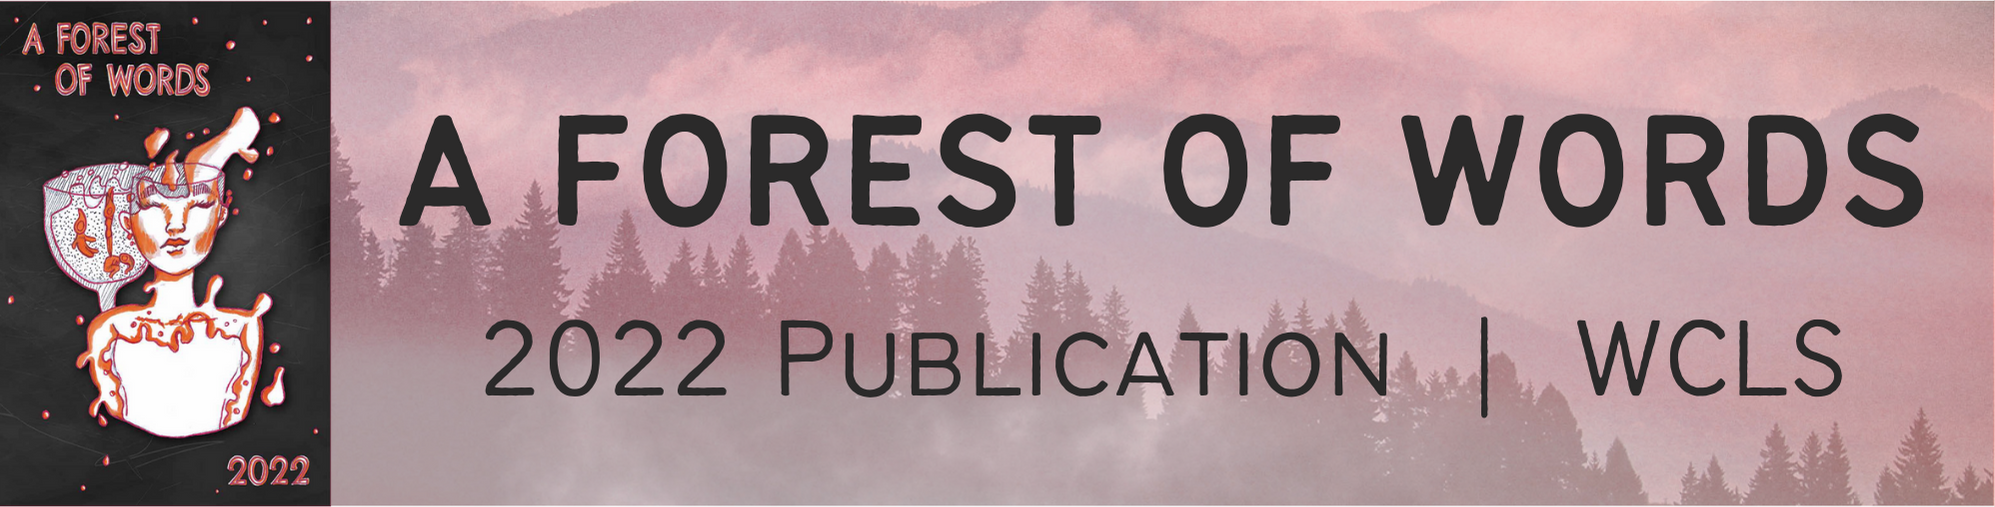 A Forest of Words, Pink Sky, Trees, Mountains